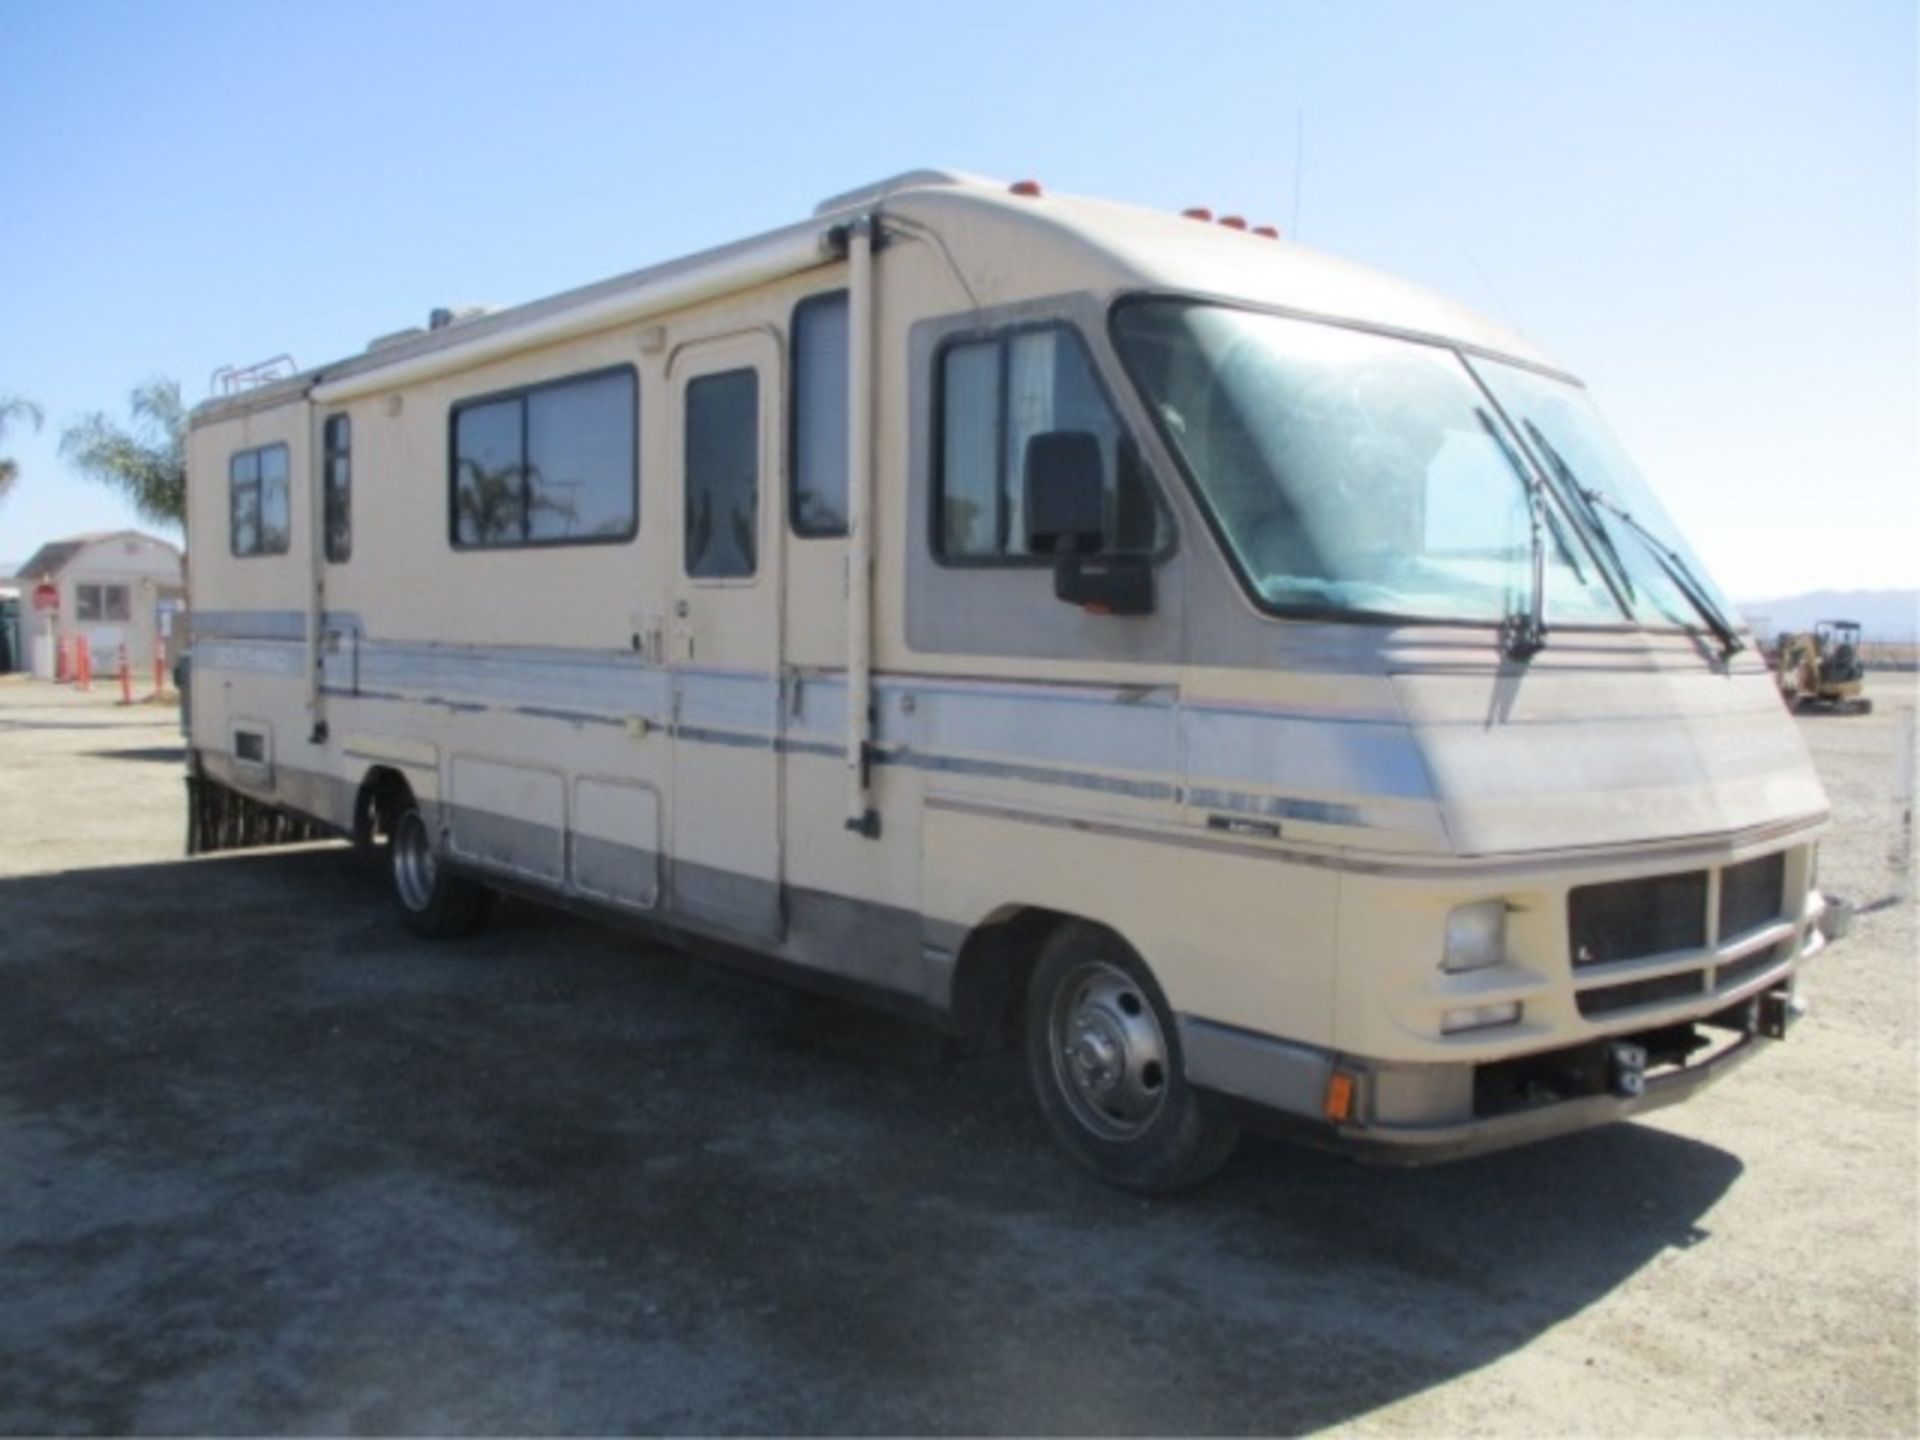 Fleetwood Southwind Motor Home, V8 Gas, Automatic, Refrigerator, Microwave, Stove, Bathroom W/ - Image 8 of 121